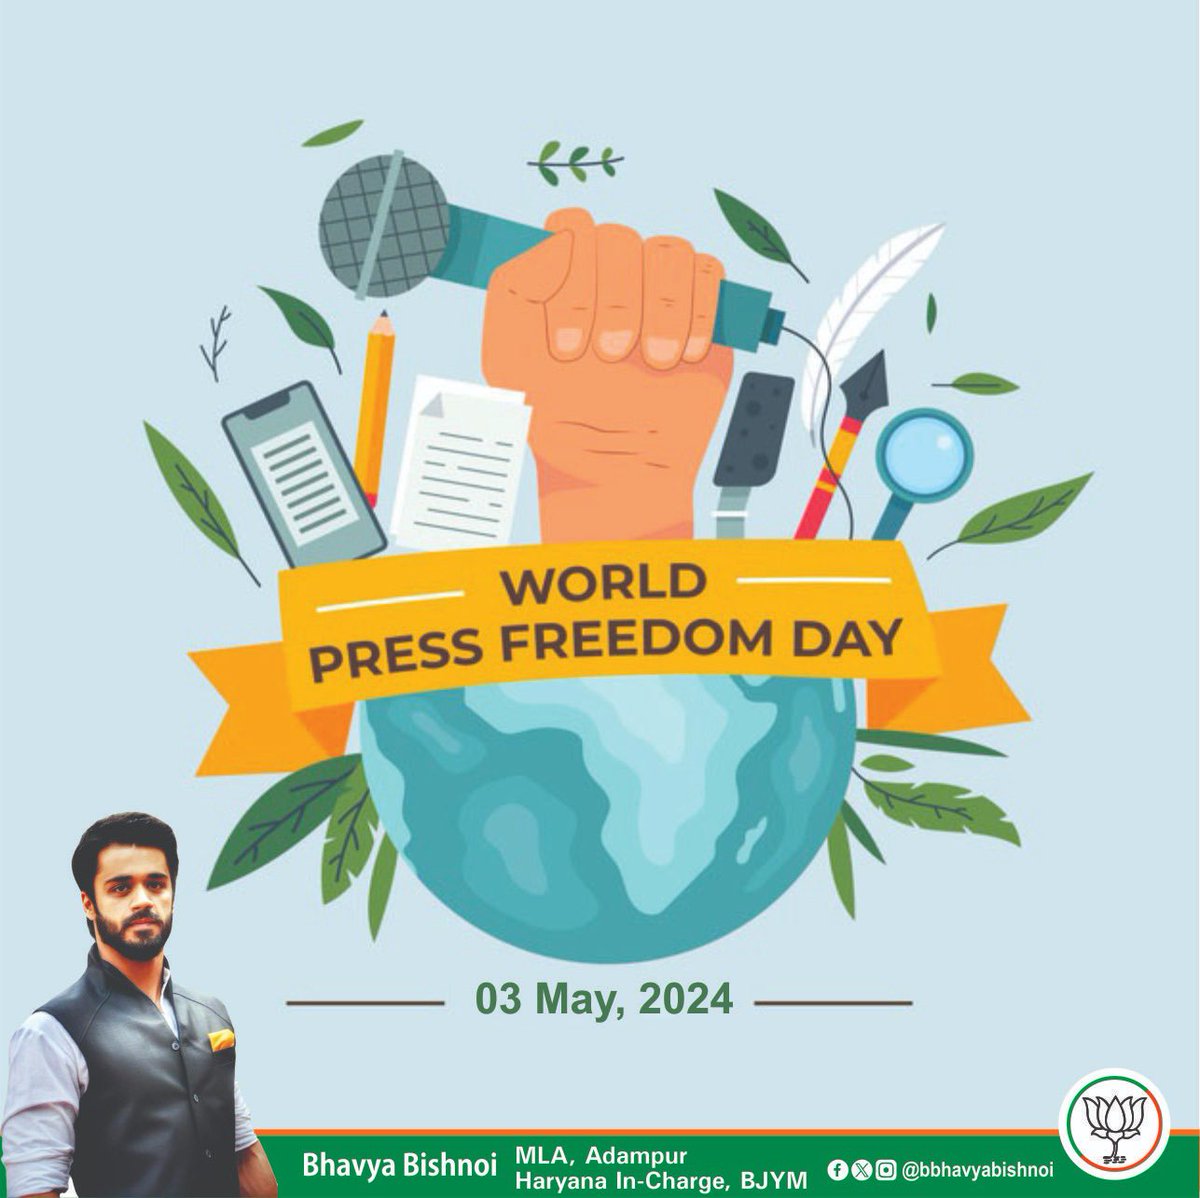 On #WorldPressFreedomDay, let’s defend & promote the fundamental principles of press freedom essential for democracy. Today serves as a reminder of the vital role journalists play in holding power to account, fostering transparency, & contributing to informed public debate.